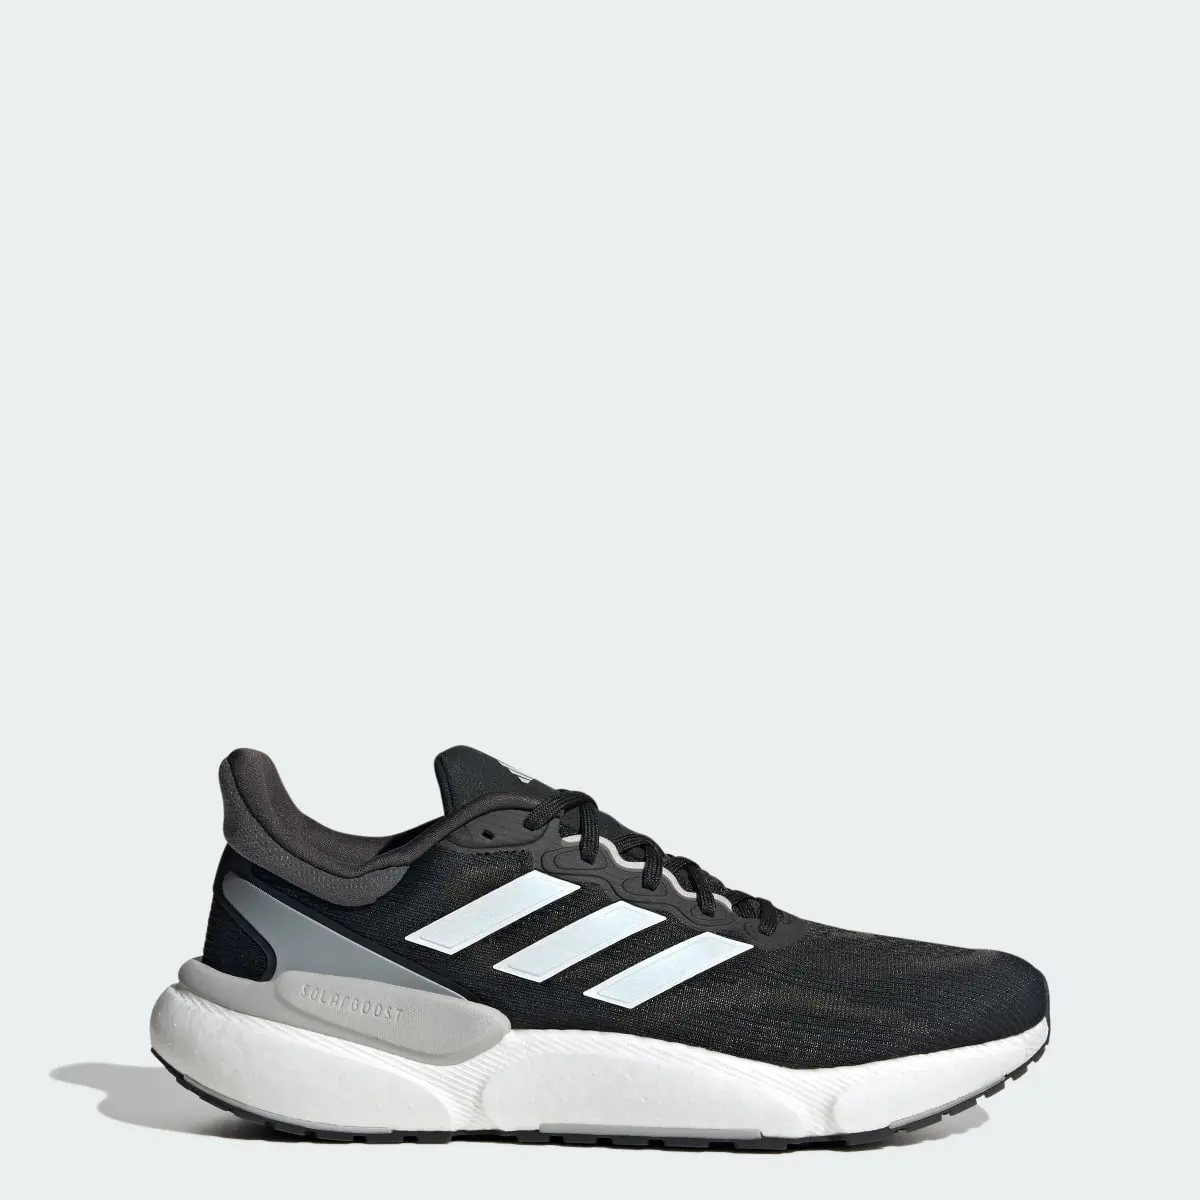 Adidas Solarboost 5 Running Shoes. 1